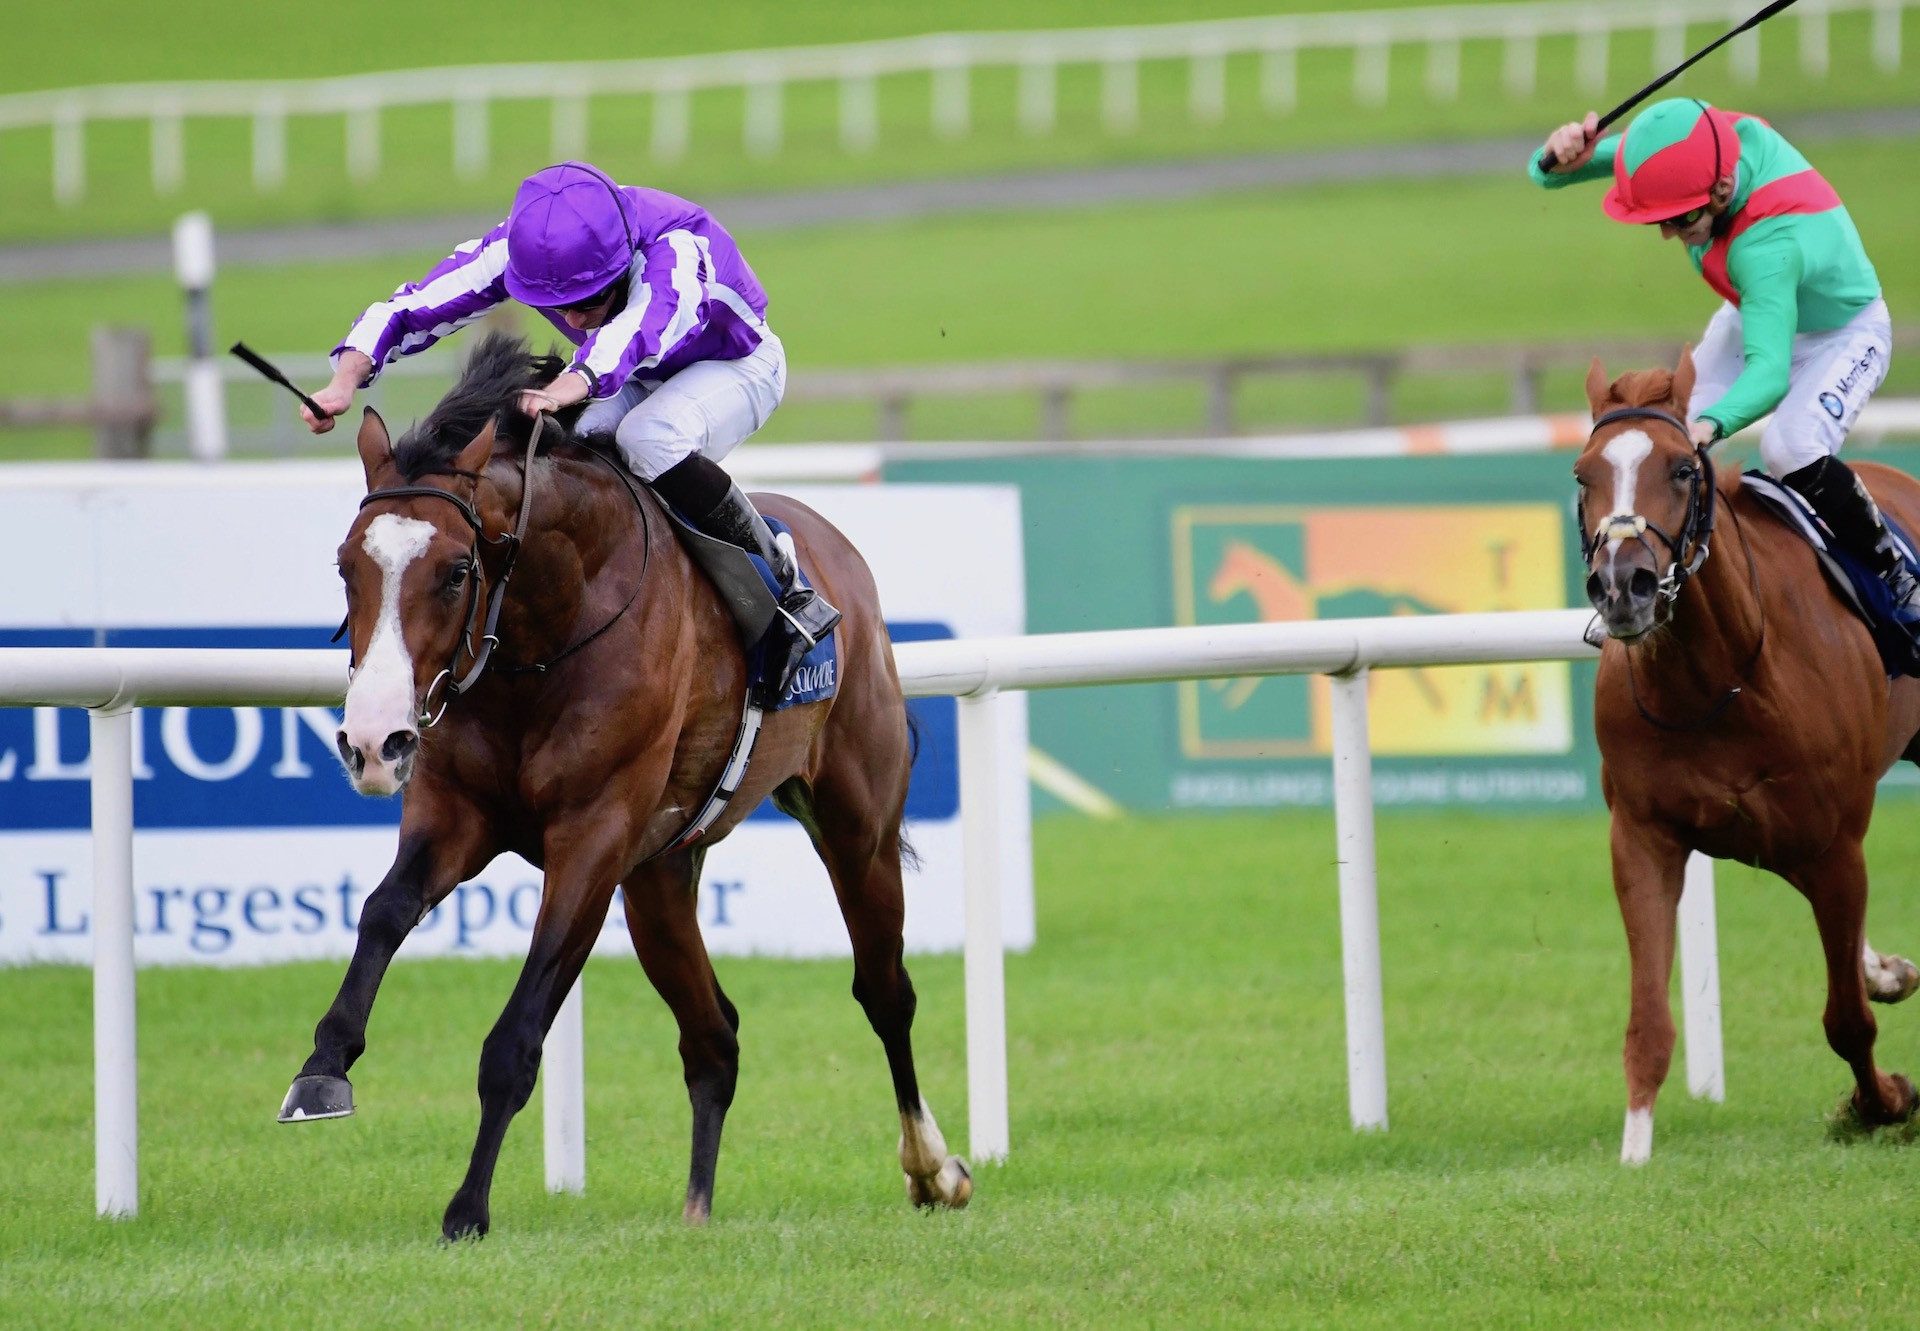 Point Lonsdale (Australia) Lands The Group 2 Futurity Stakes at the Curragh